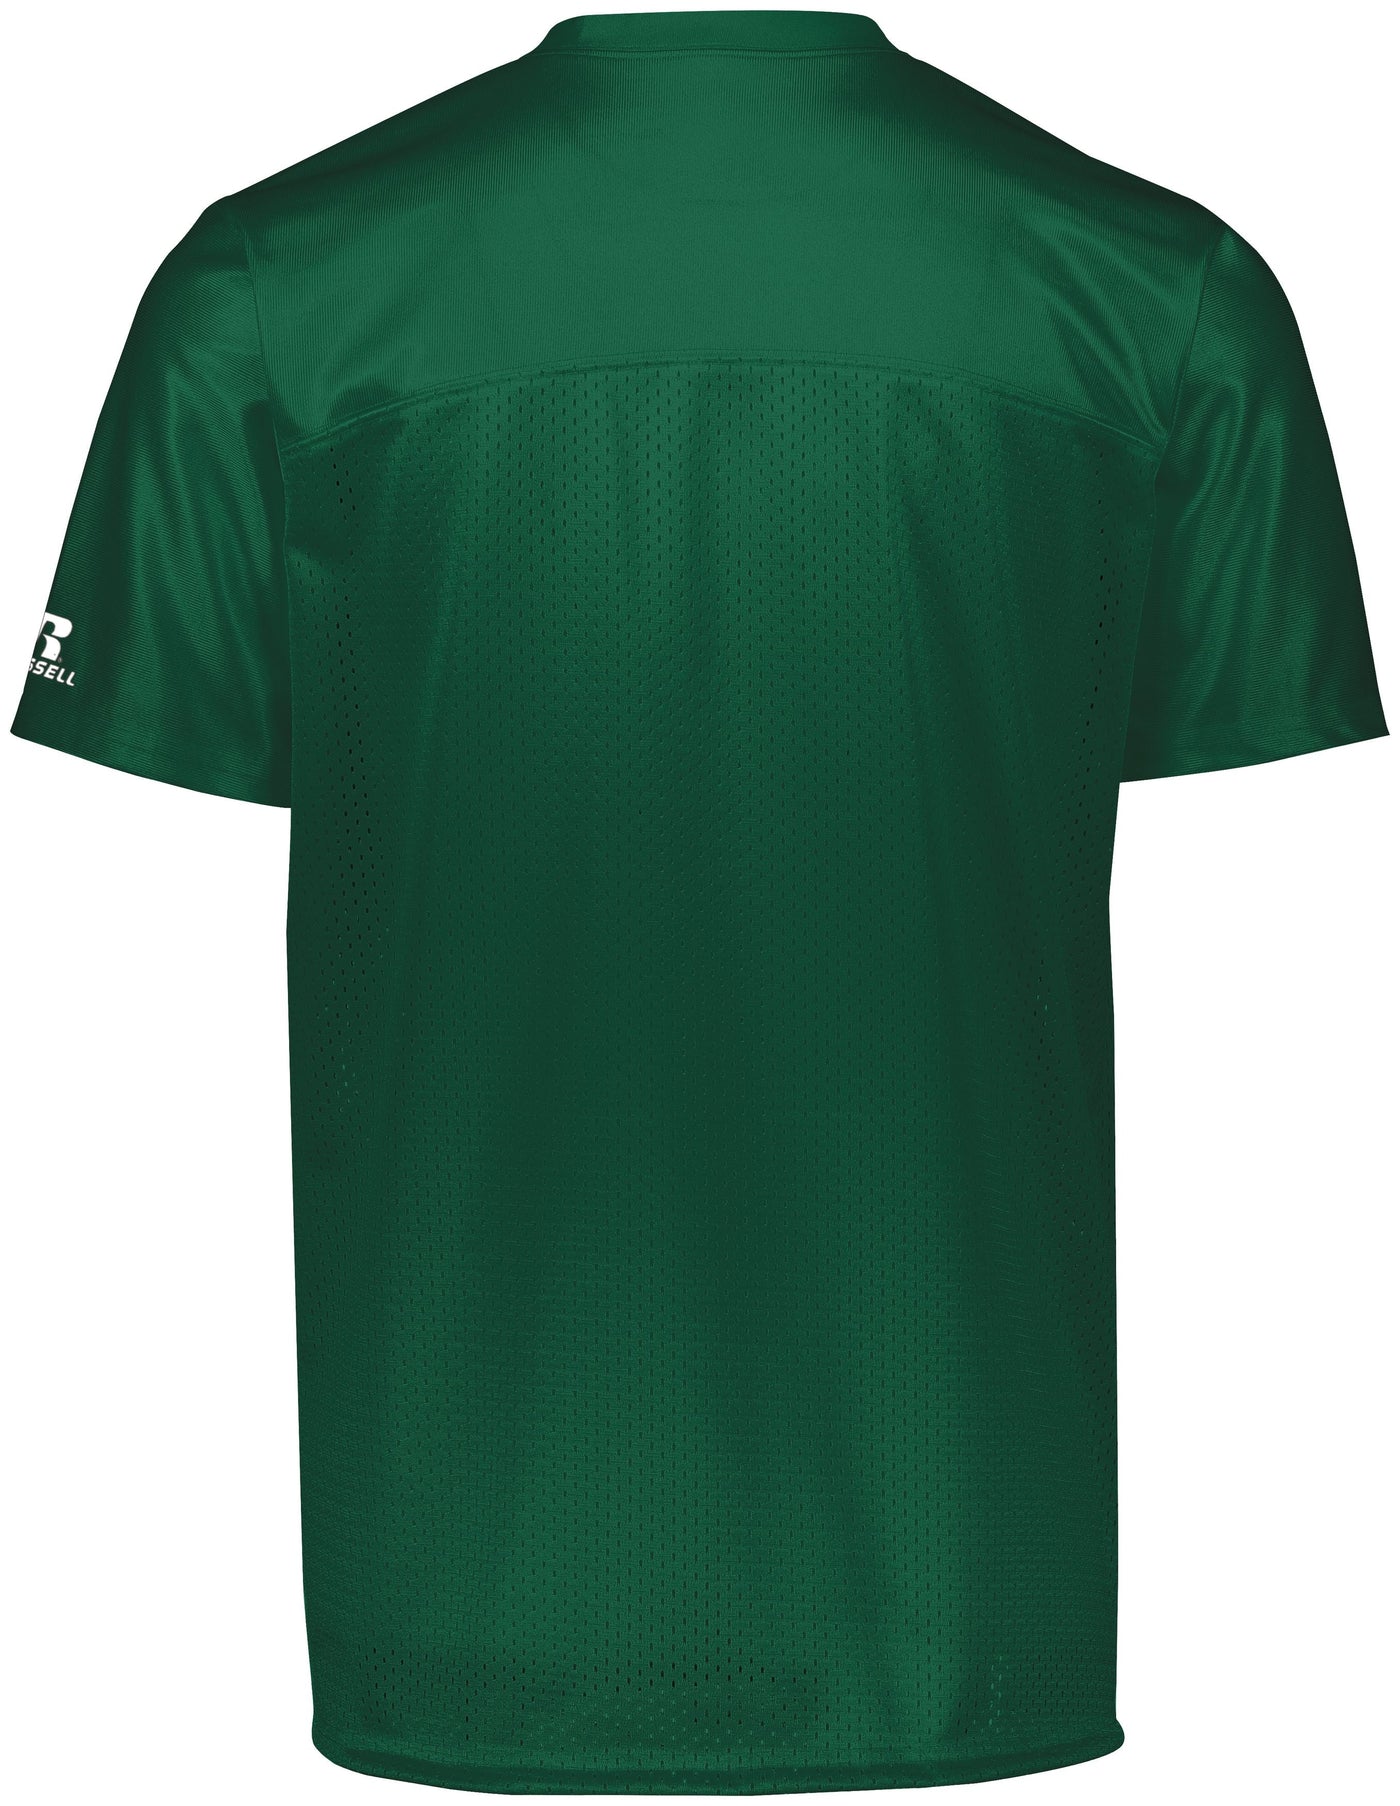 Solid Green Flag Football Jersey